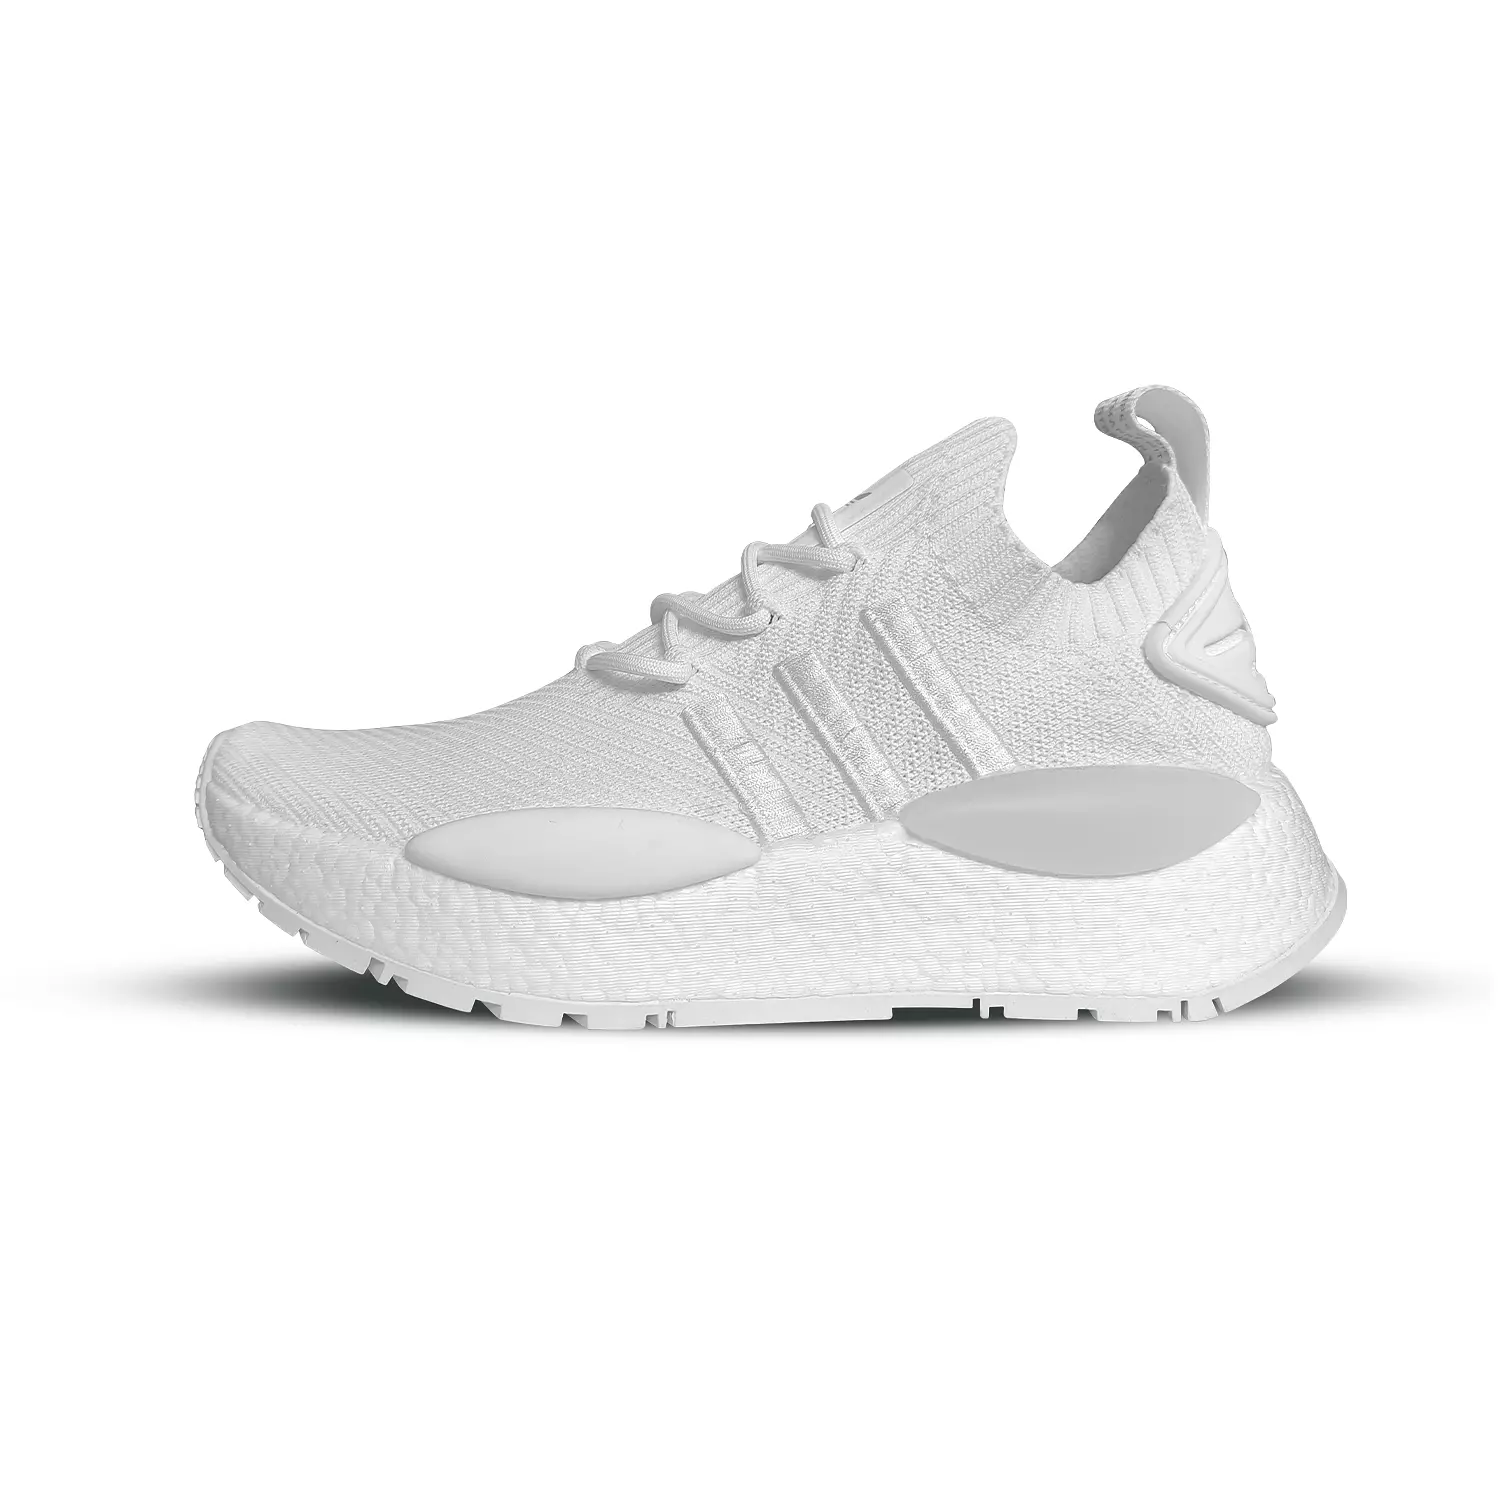 ADIDAS 3 LINE - RUNNING SHOES 1